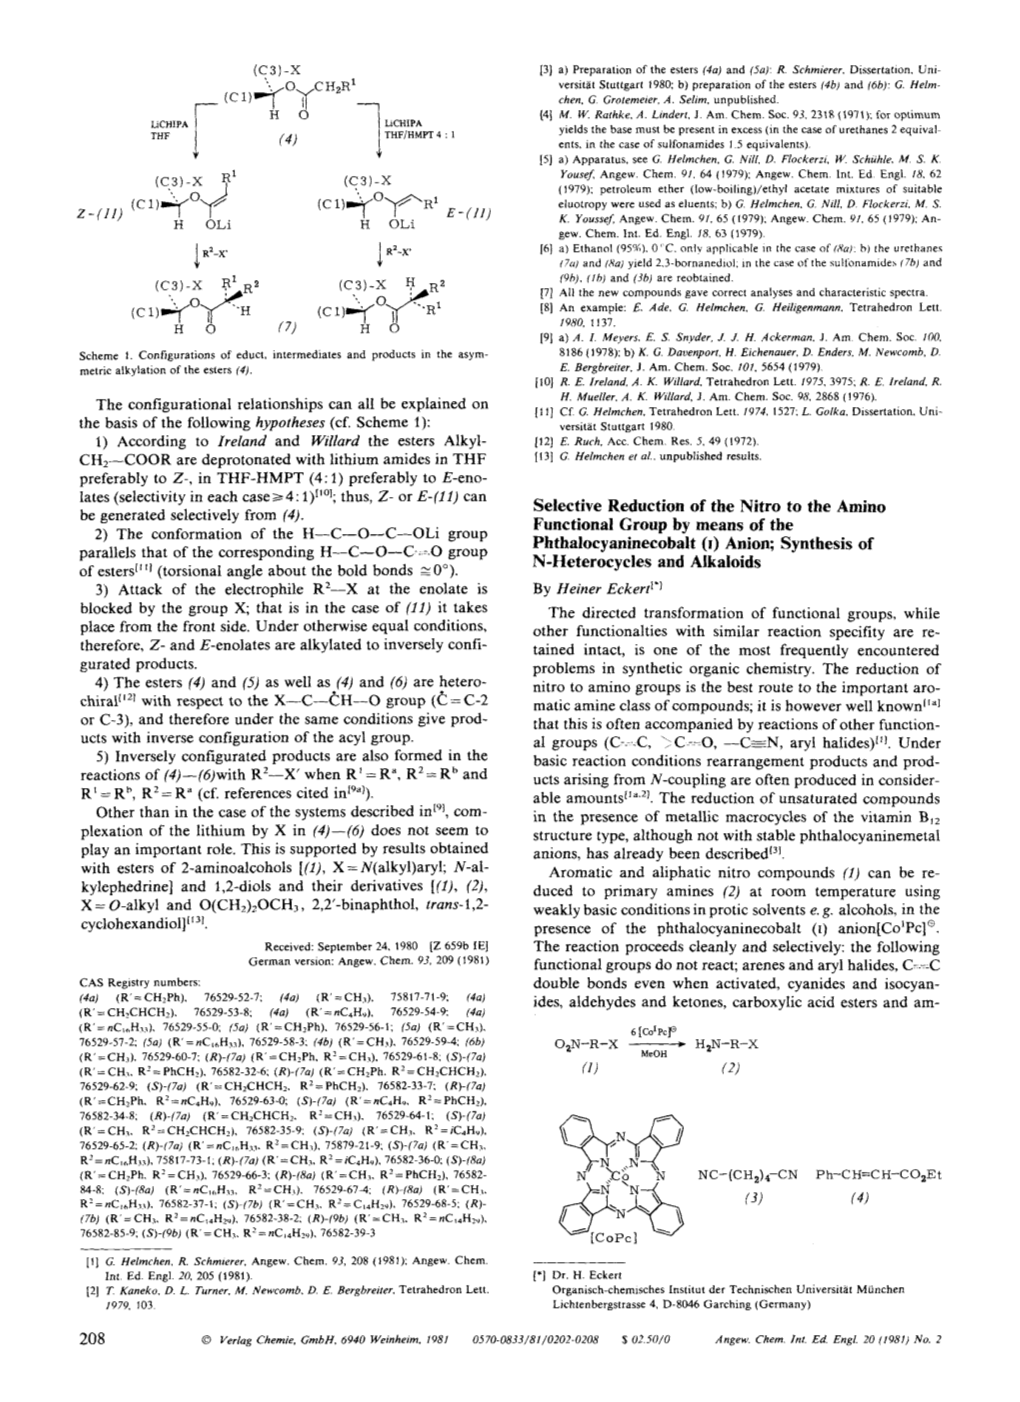 I) Anion; Synthesis of Parallels That of the Corresponding H-C-0-C--=0 Group N-Heterocycles and Alkaloids of Estersliil (Torsional Angle About the Bold Bonds ~0"